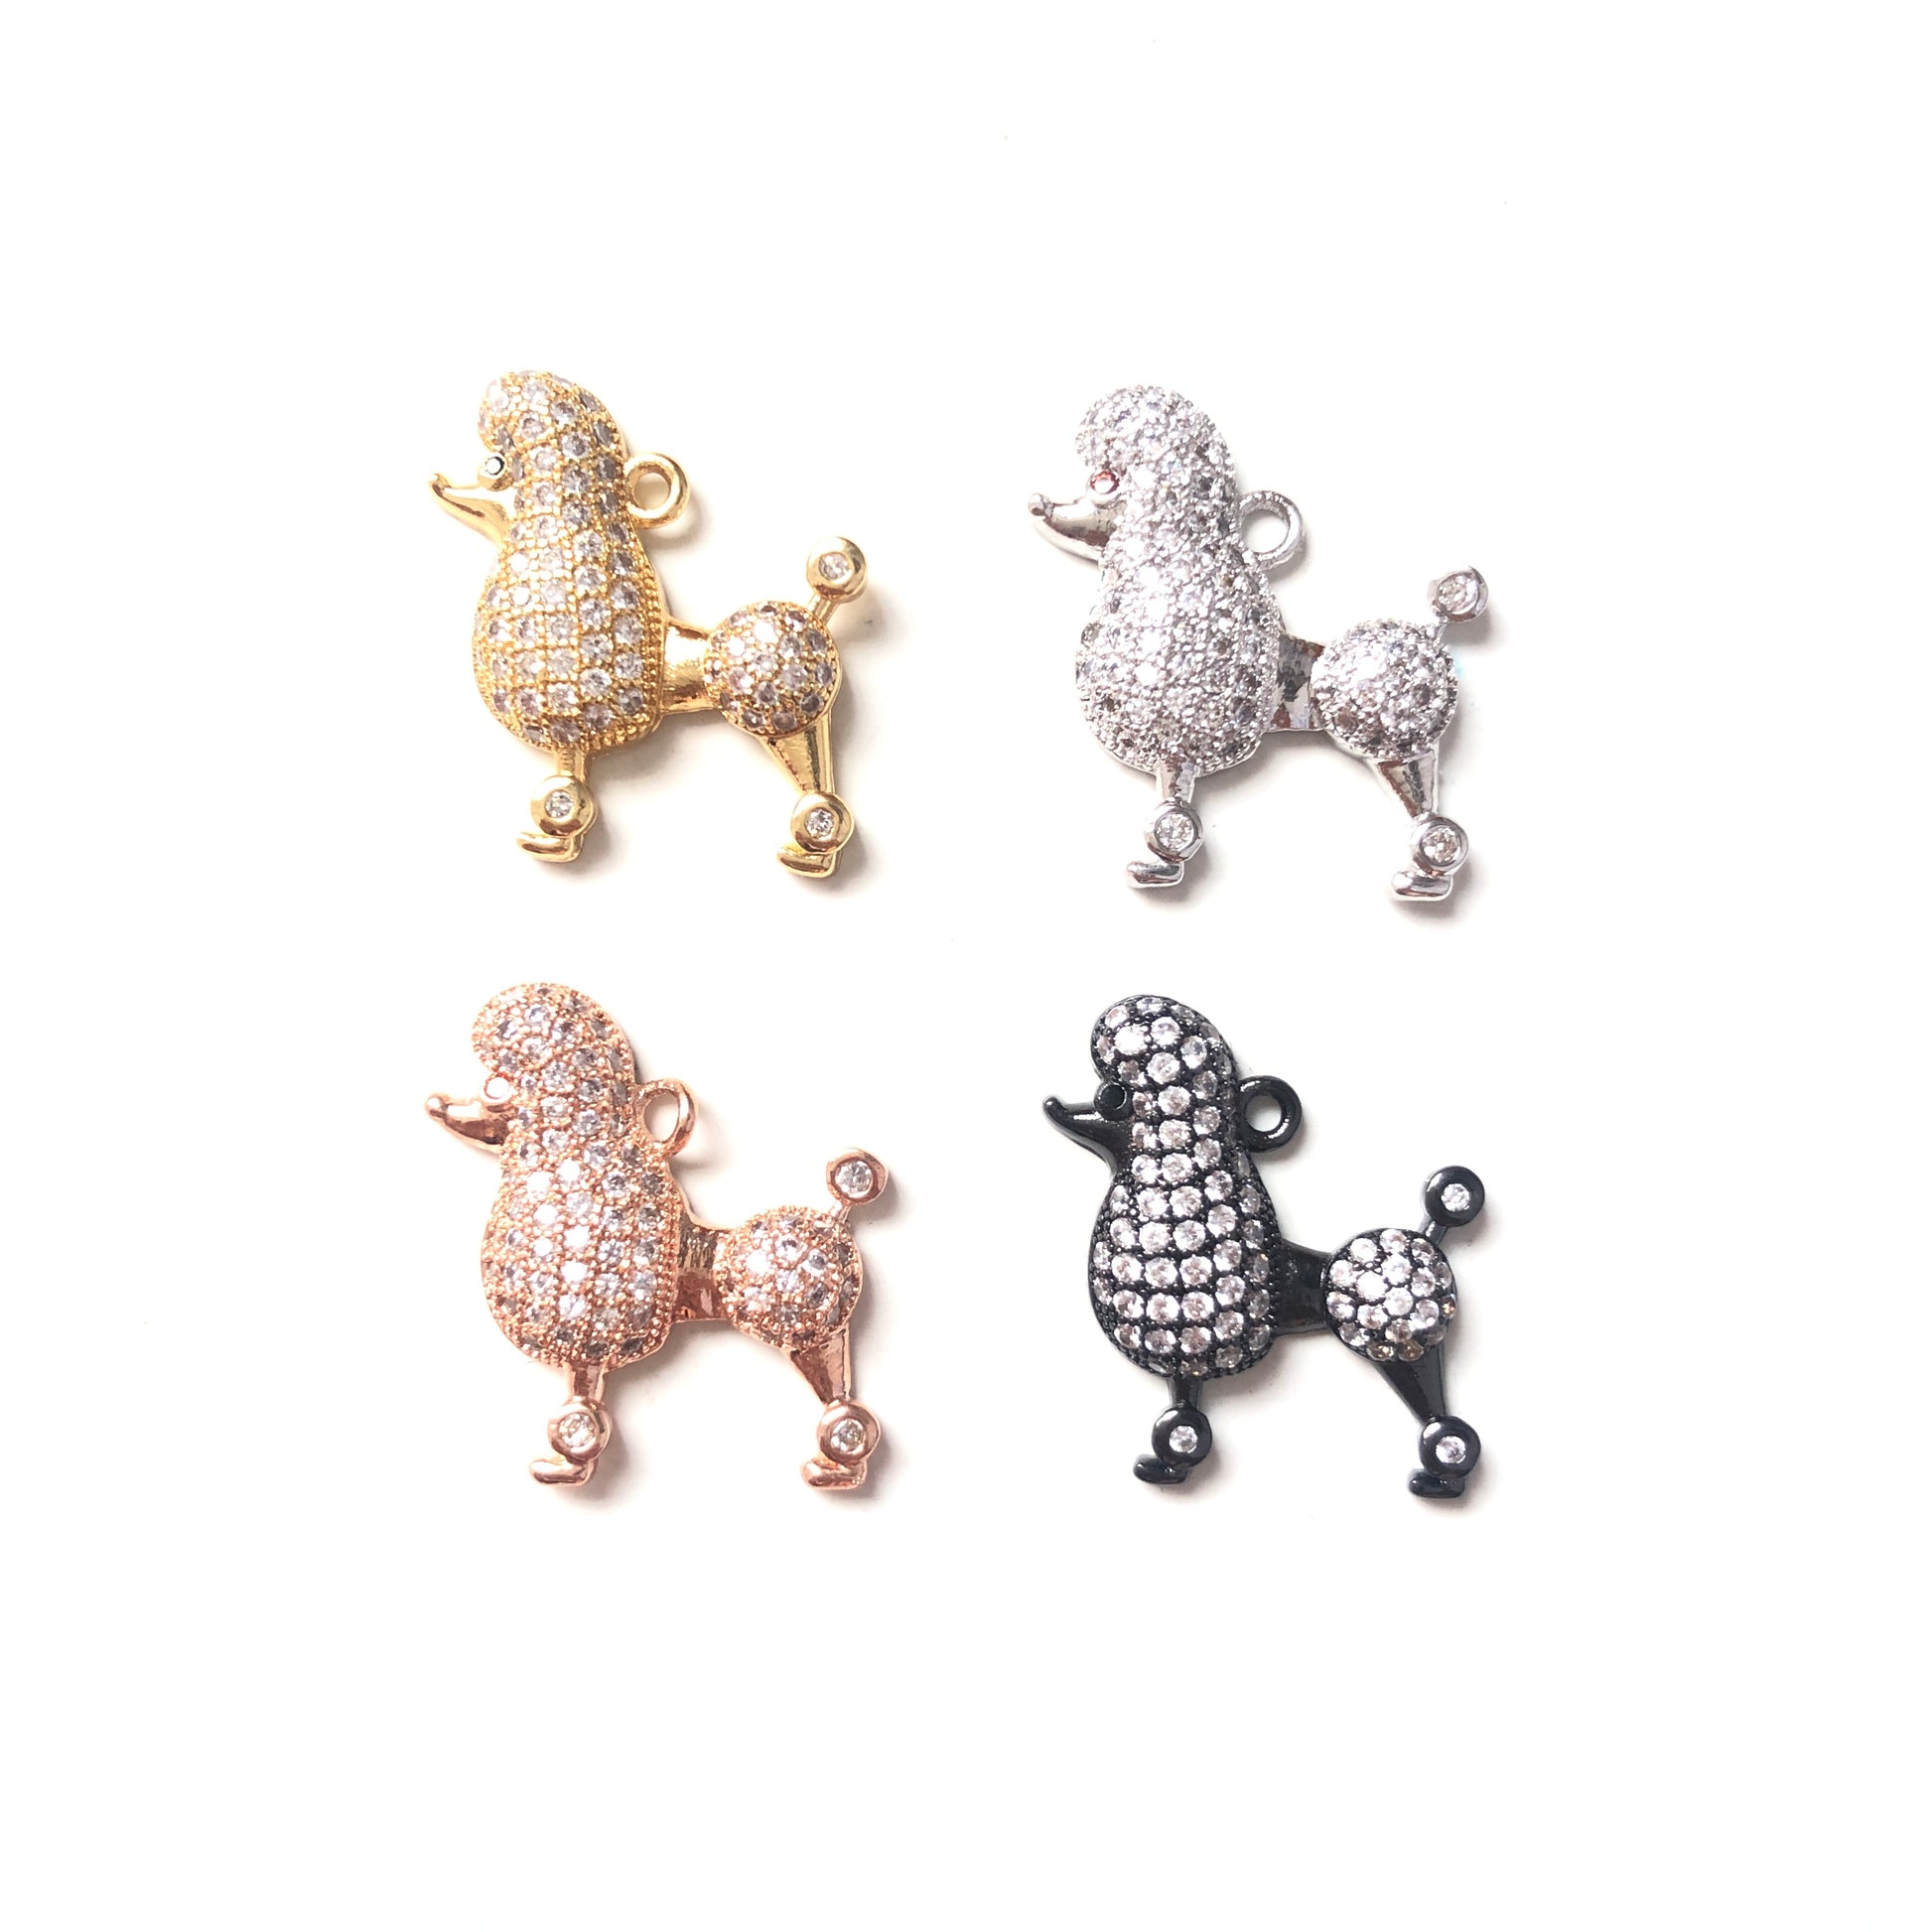 10pcs/lot 19*19mm CZ Paved Poodle Charms CZ Paved Charms Animals & Insects Charms Beads Beyond